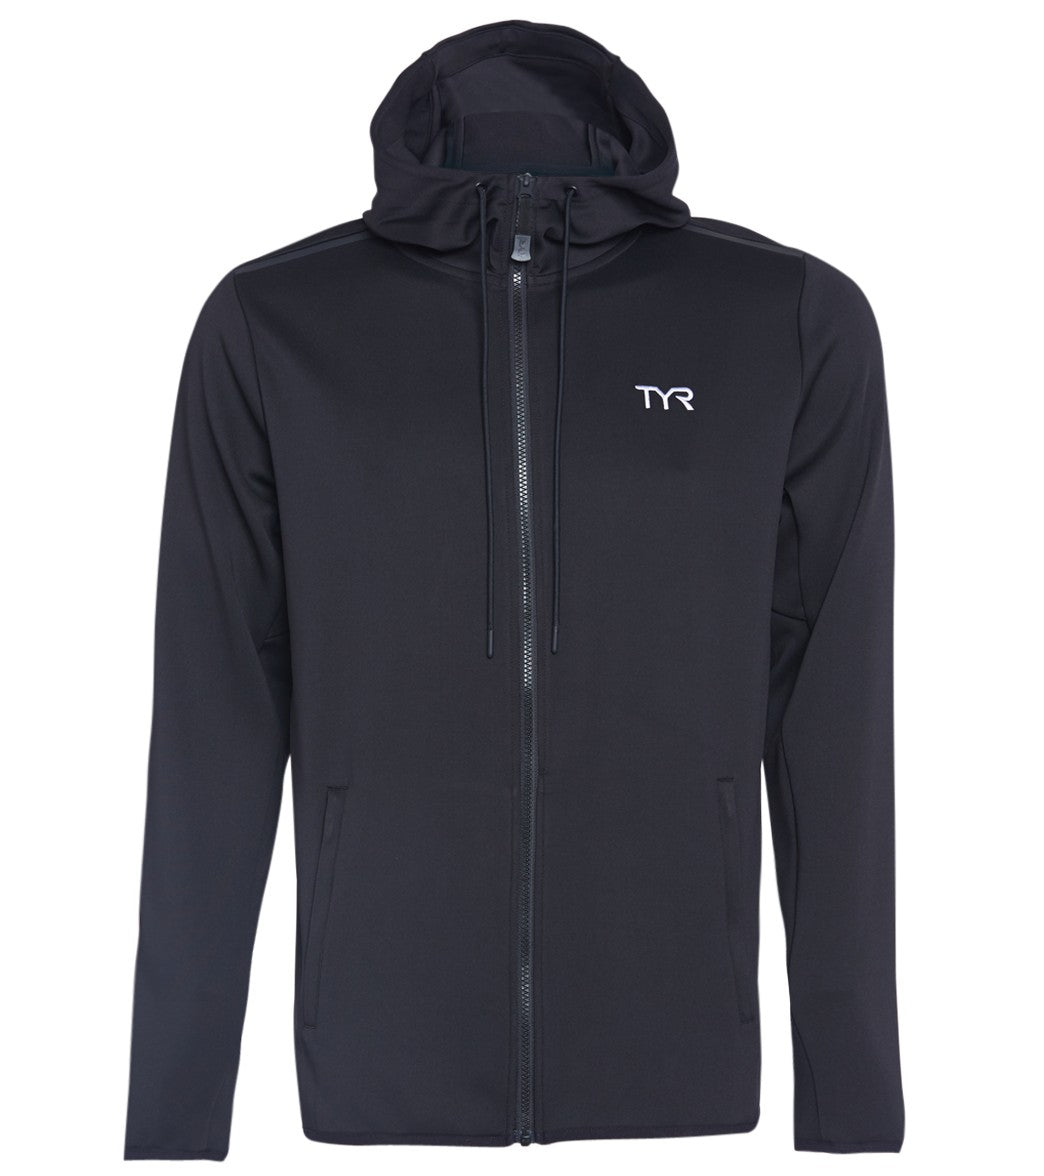 TYR Men's Team Full Zip Hoodie - Black Large Size Large Polyester - Swimoutlet.com